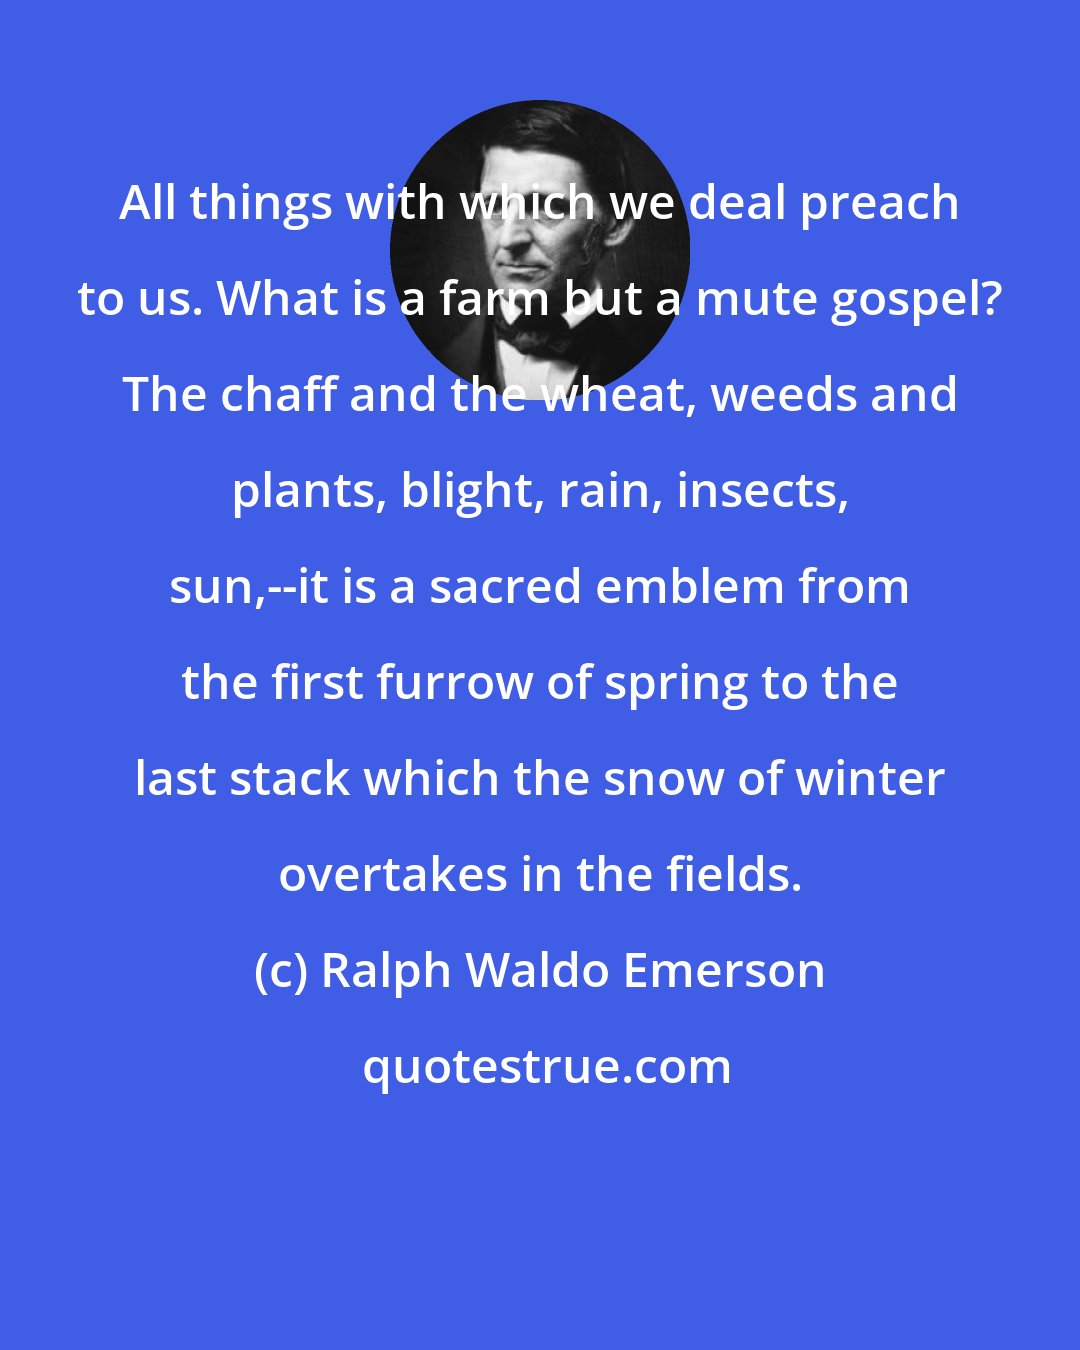 Ralph Waldo Emerson: All things with which we deal preach to us. What is a farm but a mute gospel? The chaff and the wheat, weeds and plants, blight, rain, insects, sun,--it is a sacred emblem from the first furrow of spring to the last stack which the snow of winter overtakes in the fields.